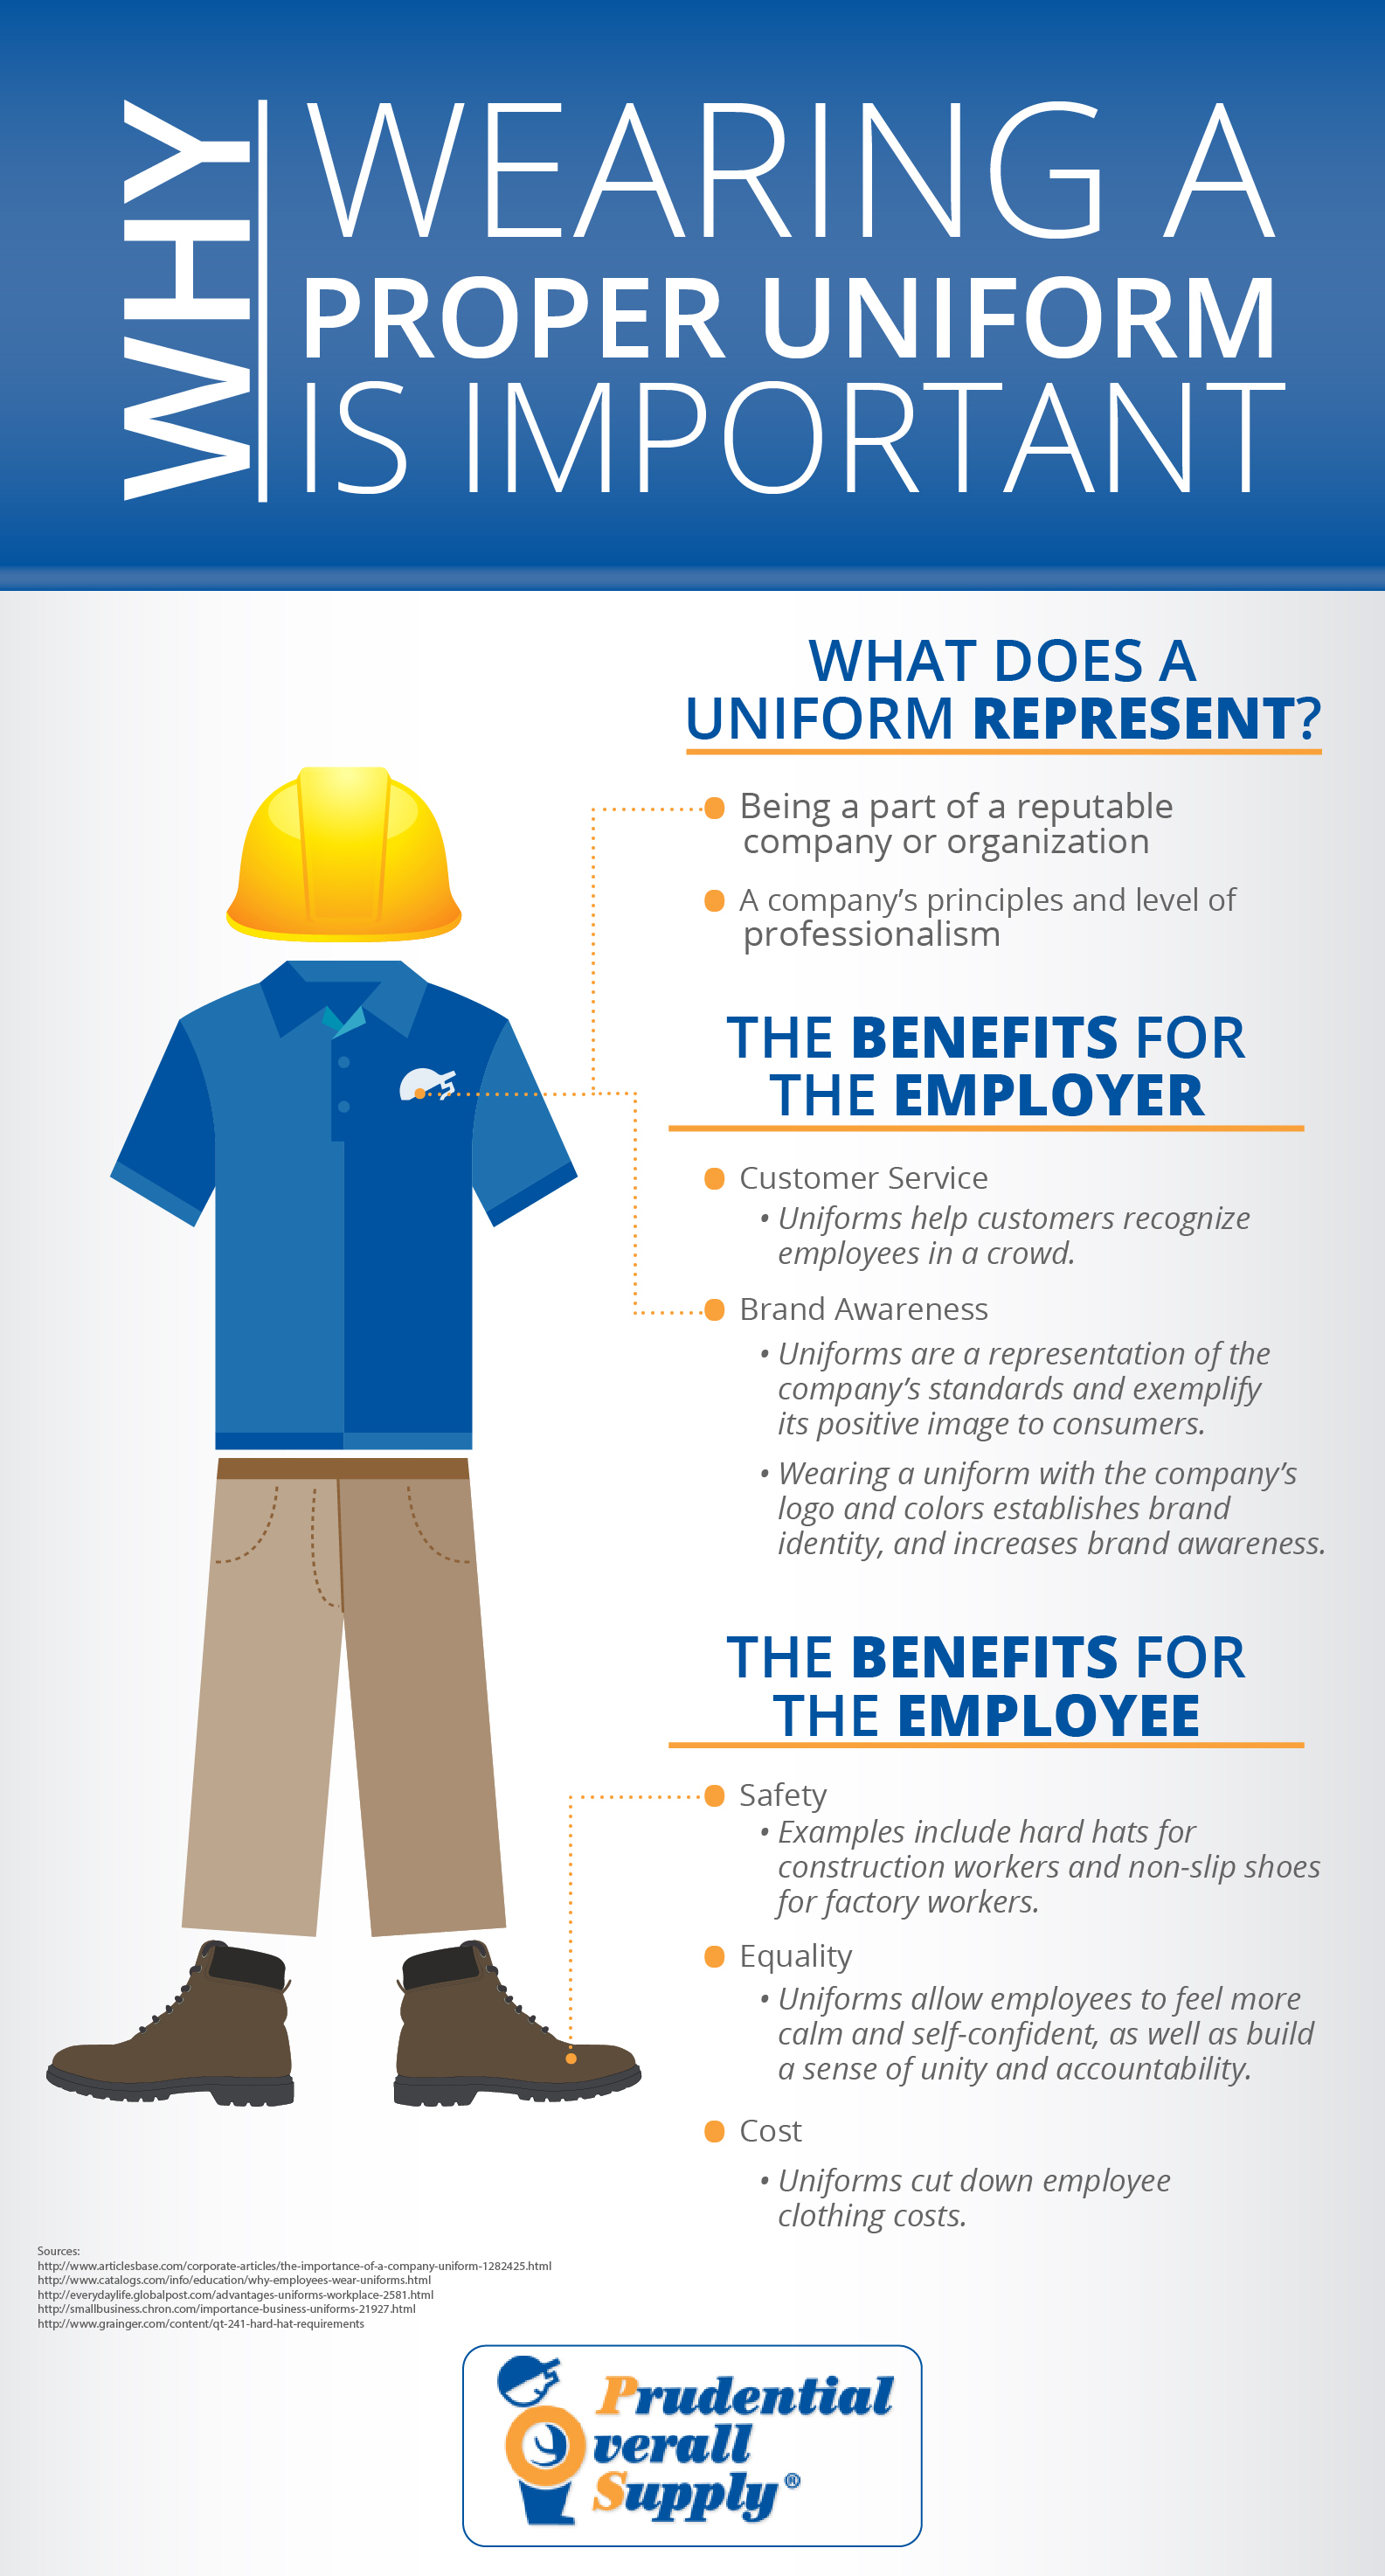 Why Uniforms Are So Important in the Workplace